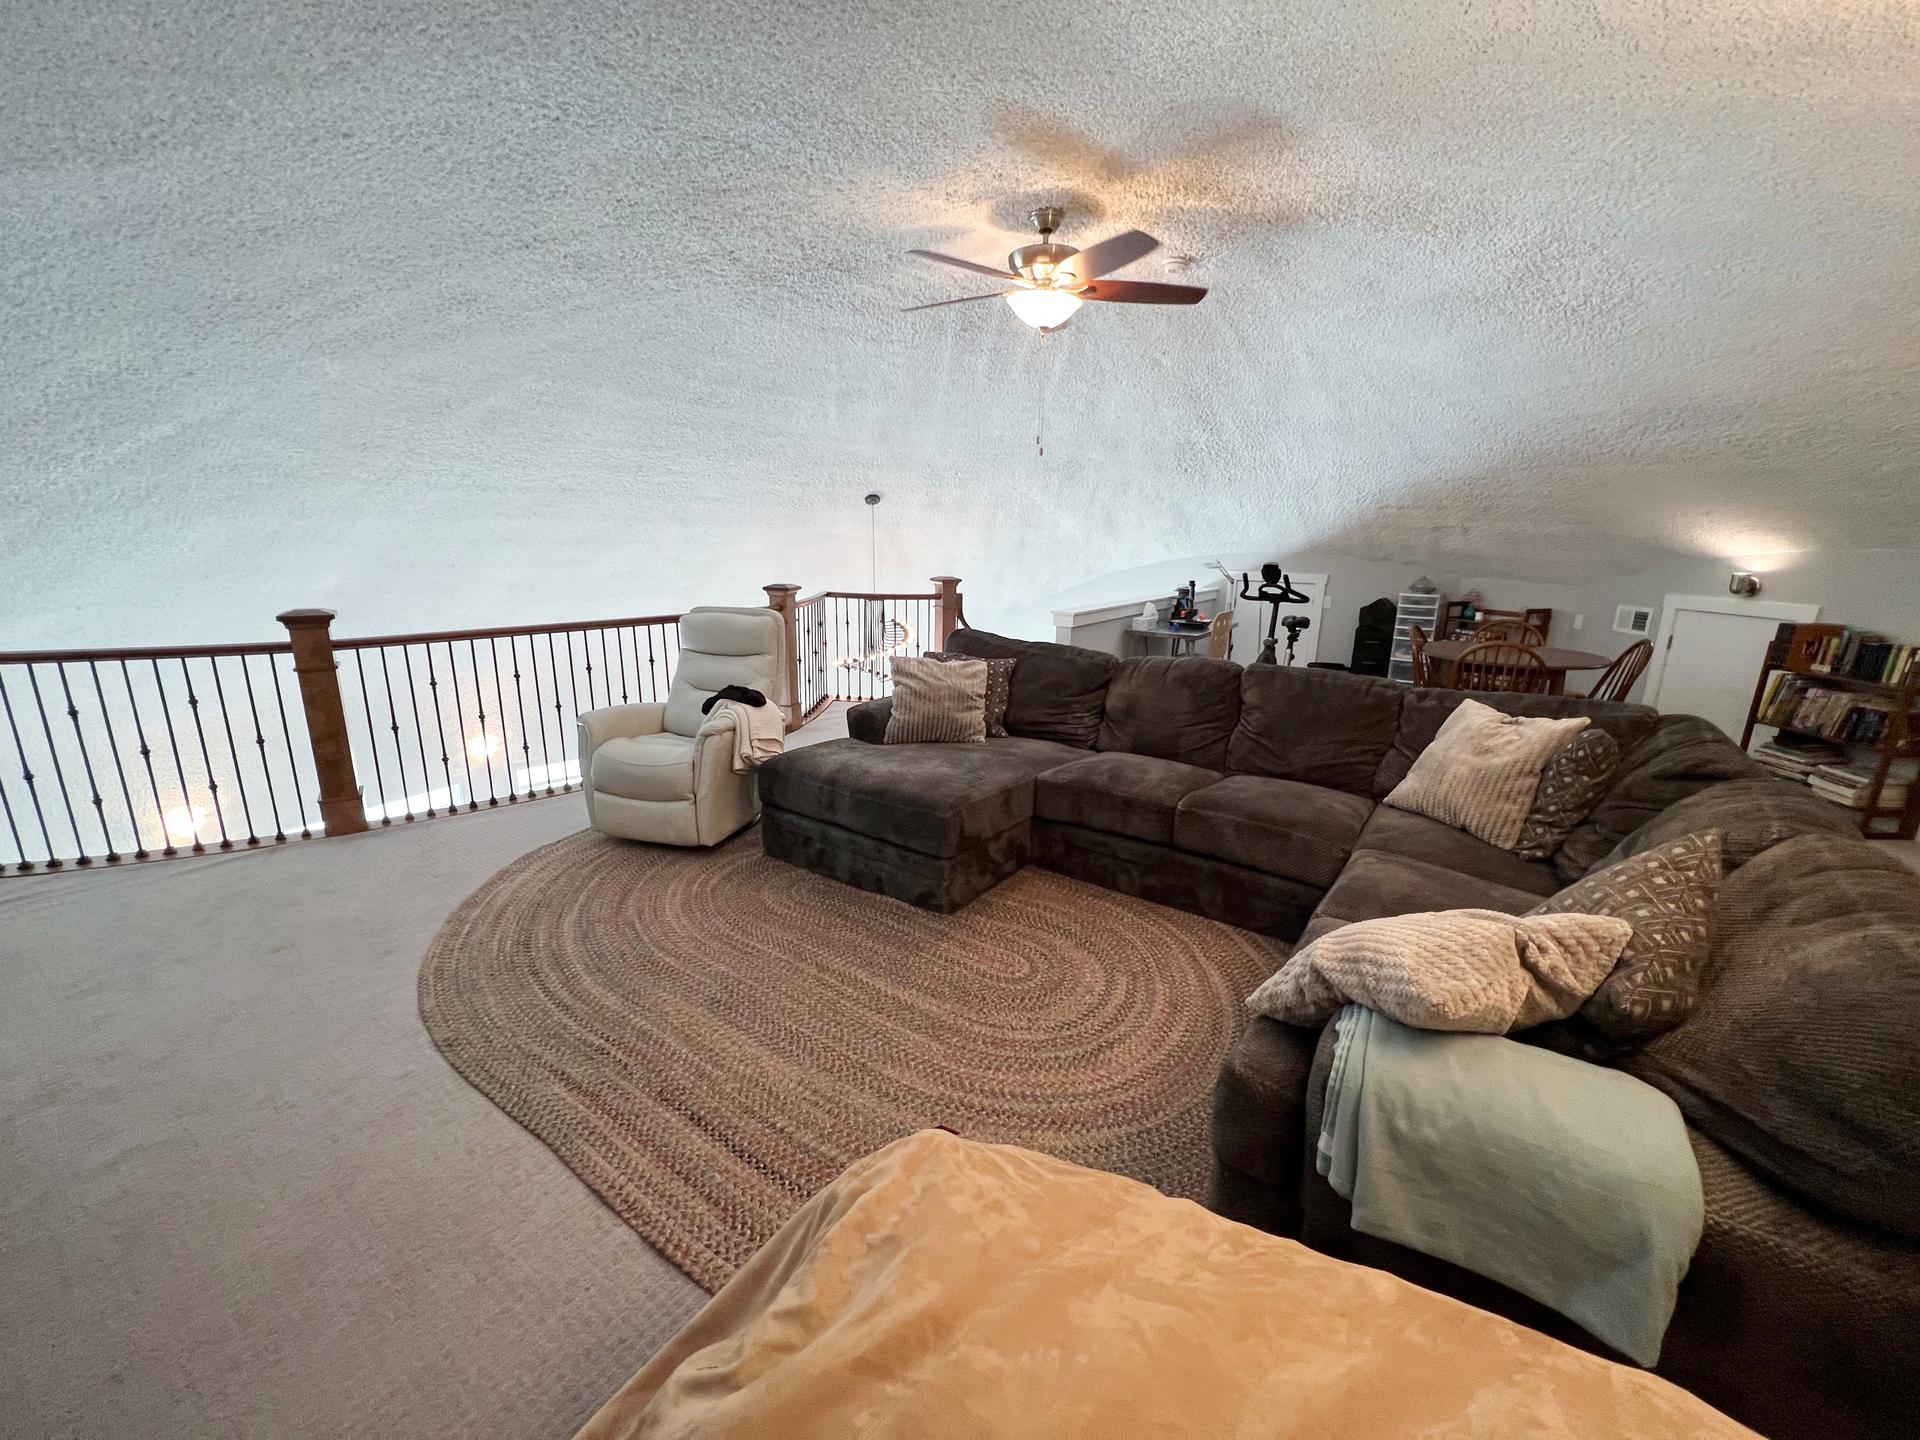 Double-Curved Ceiling over the Loft.